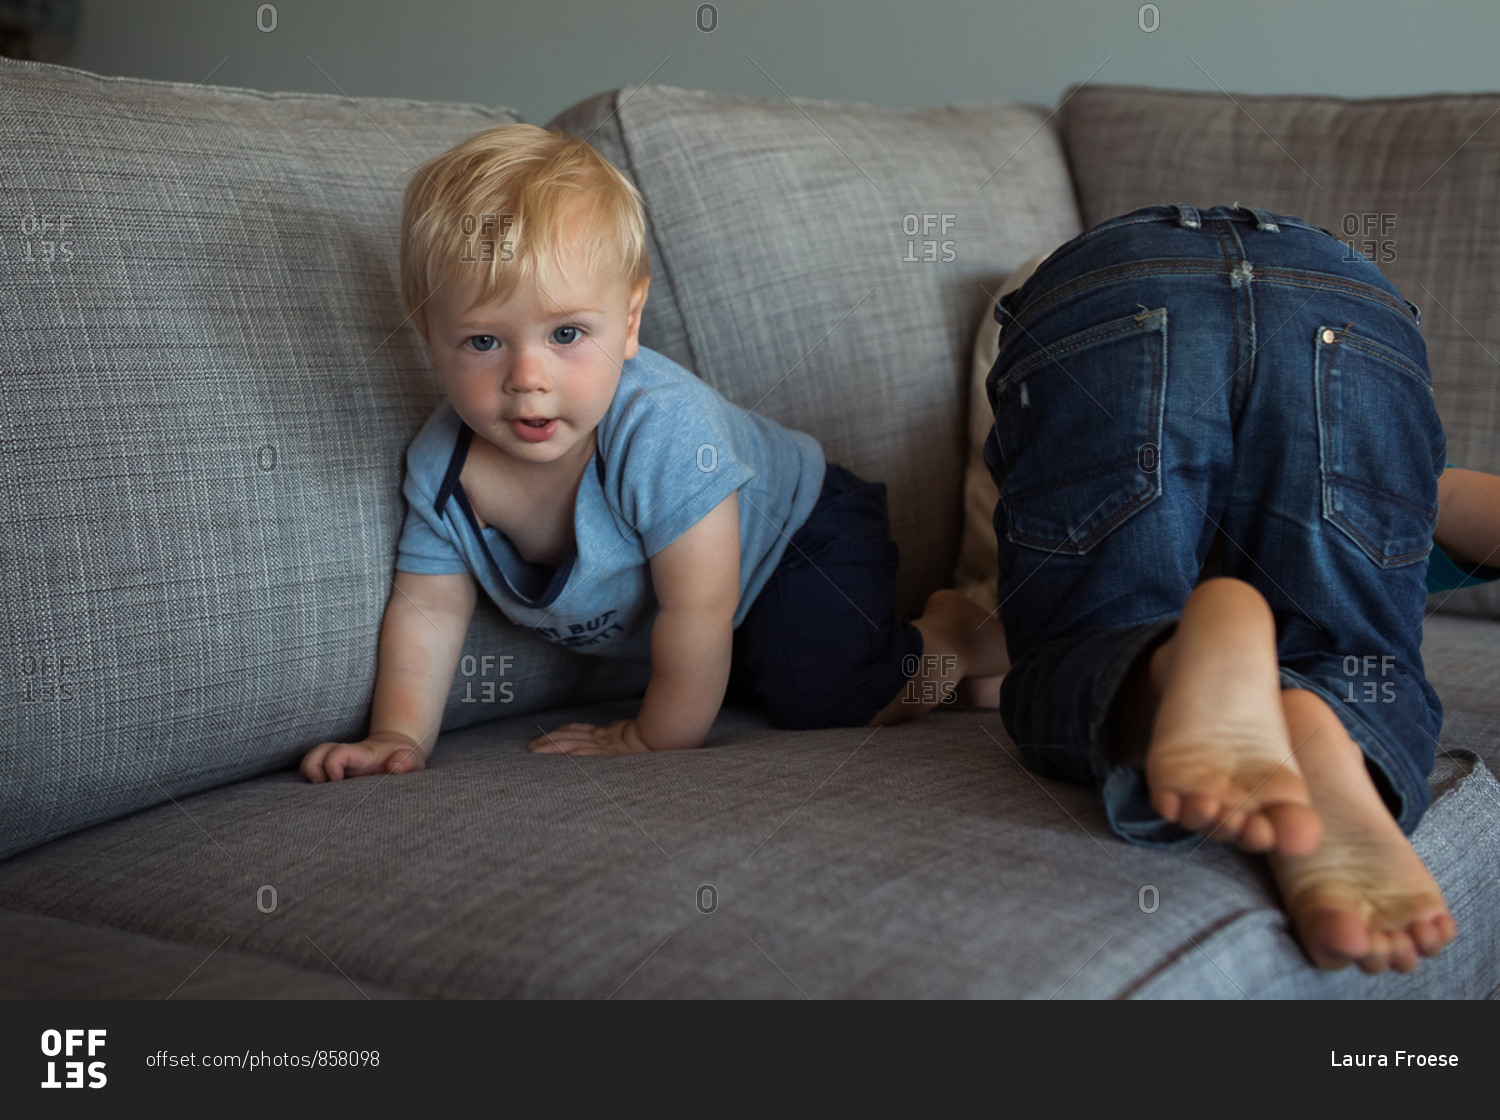 Two toddler boys playfully wrestling on a sofa